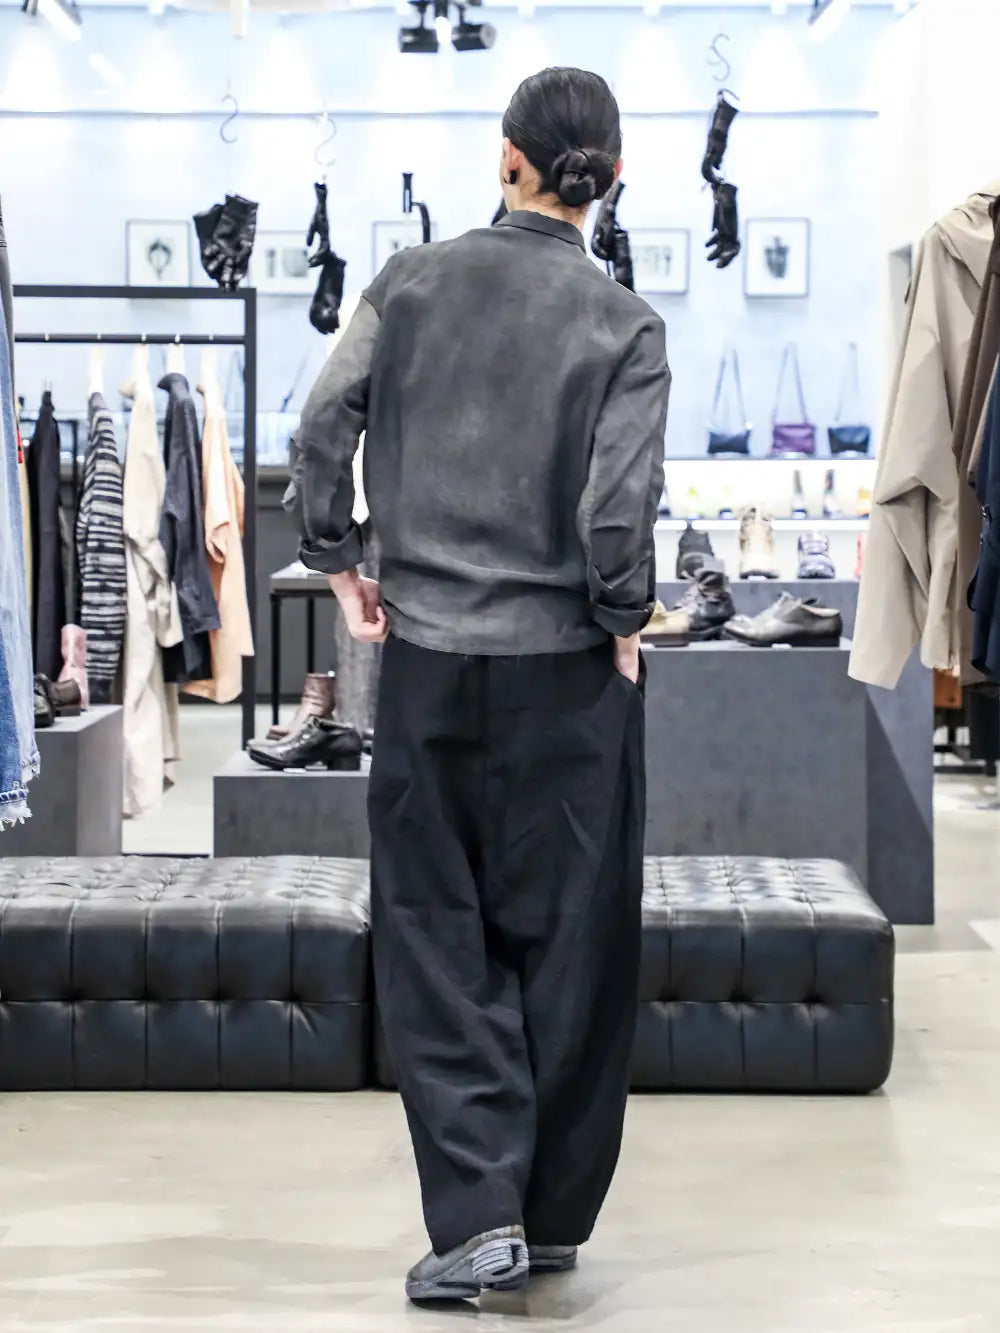 DEVOA Forme D'expression 24SS Styling - Detailed considerations for creating an atmosphere in the design - JKI-SVLR Jacket High Twist Viscose UP033 / 006B 2 Tucked Wide Leg Pants FWI-GDCT-Fade-Gray incarnation x DEVOA Shoe Horse Leather Garment Dye 1-004